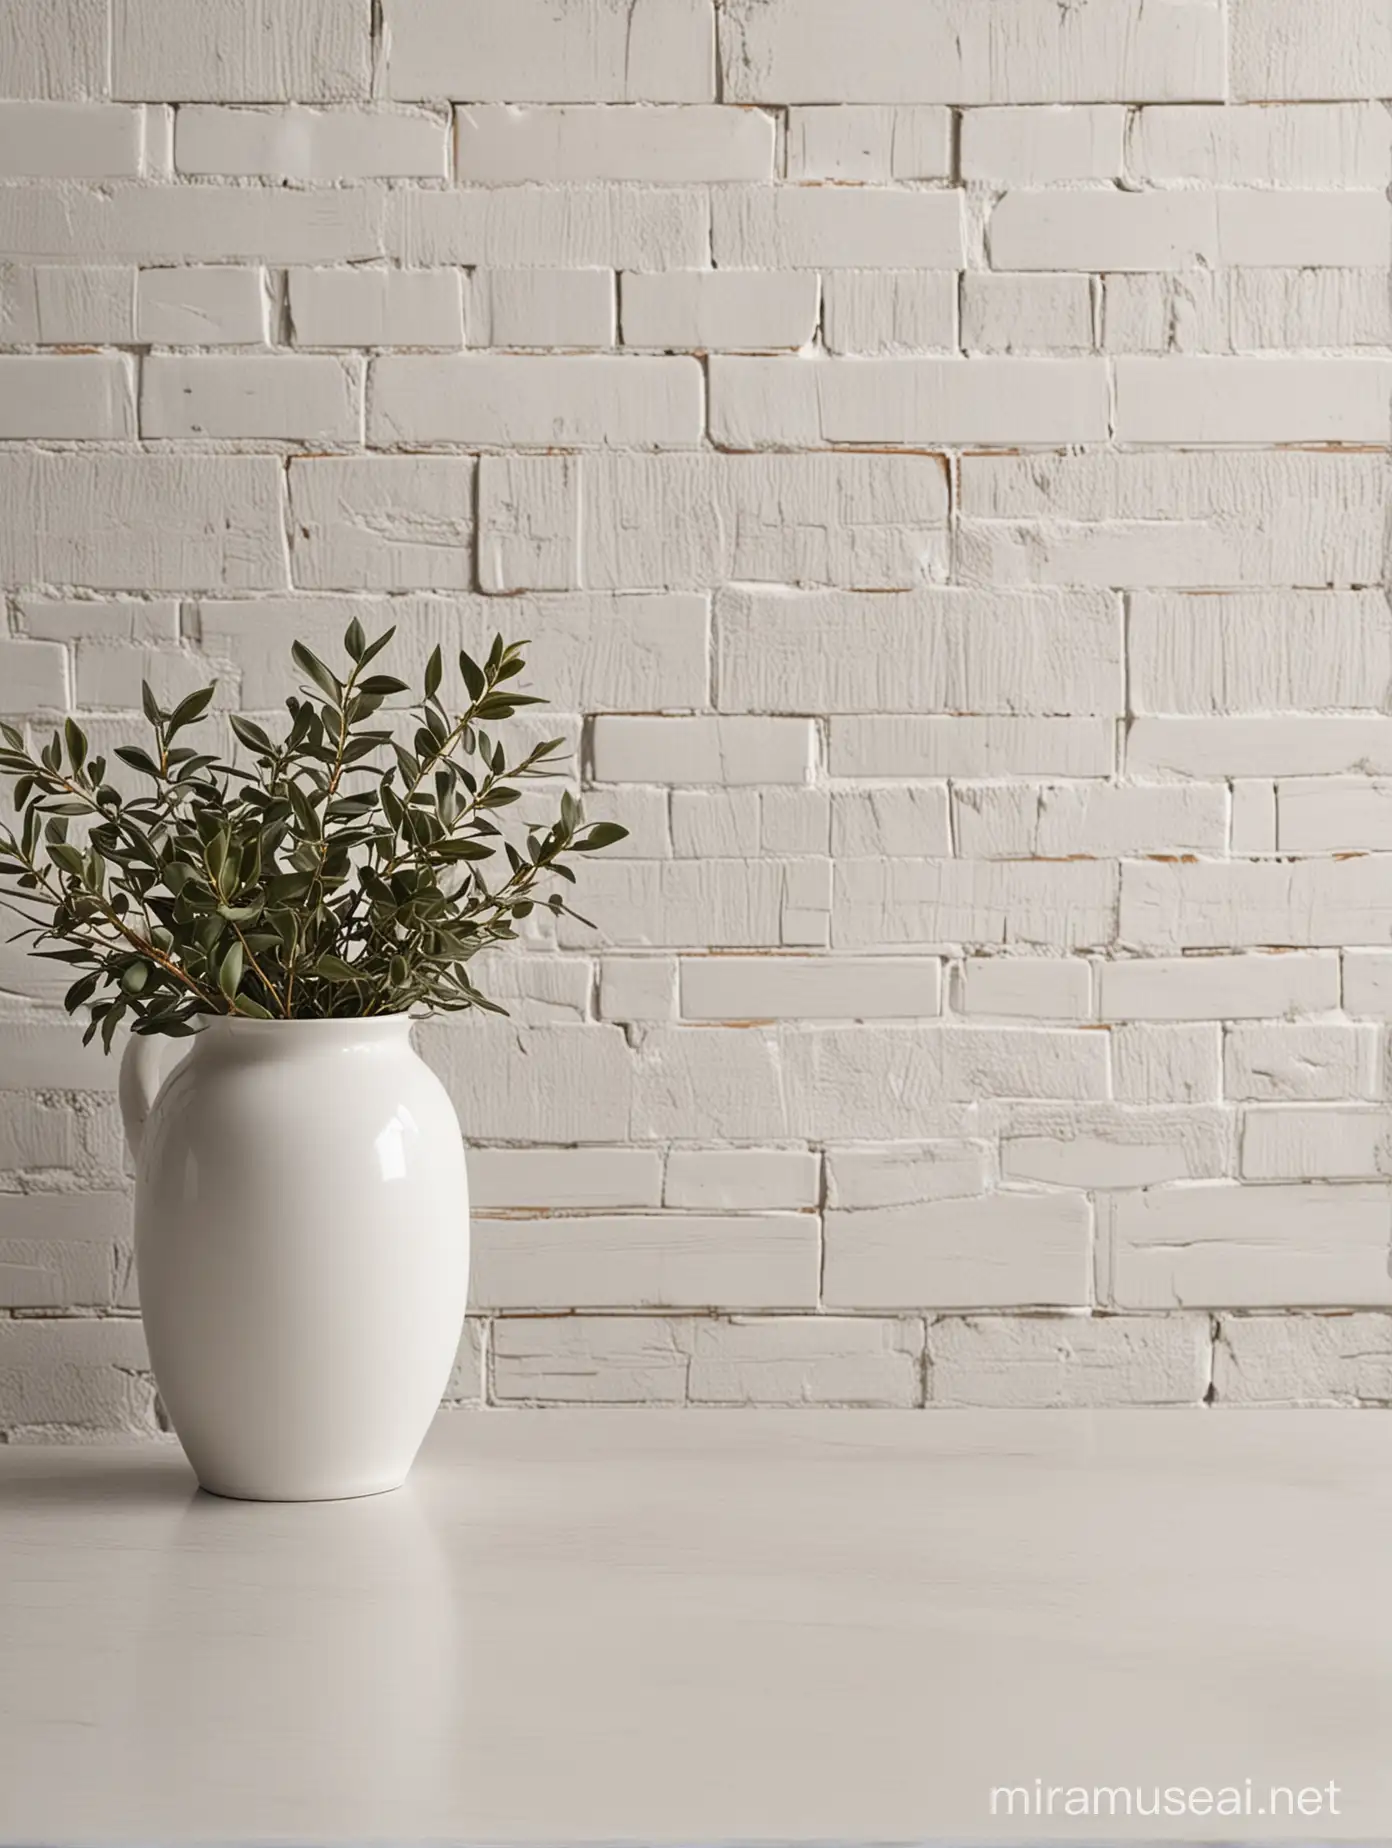 Table Corner with White Brick Wall Background